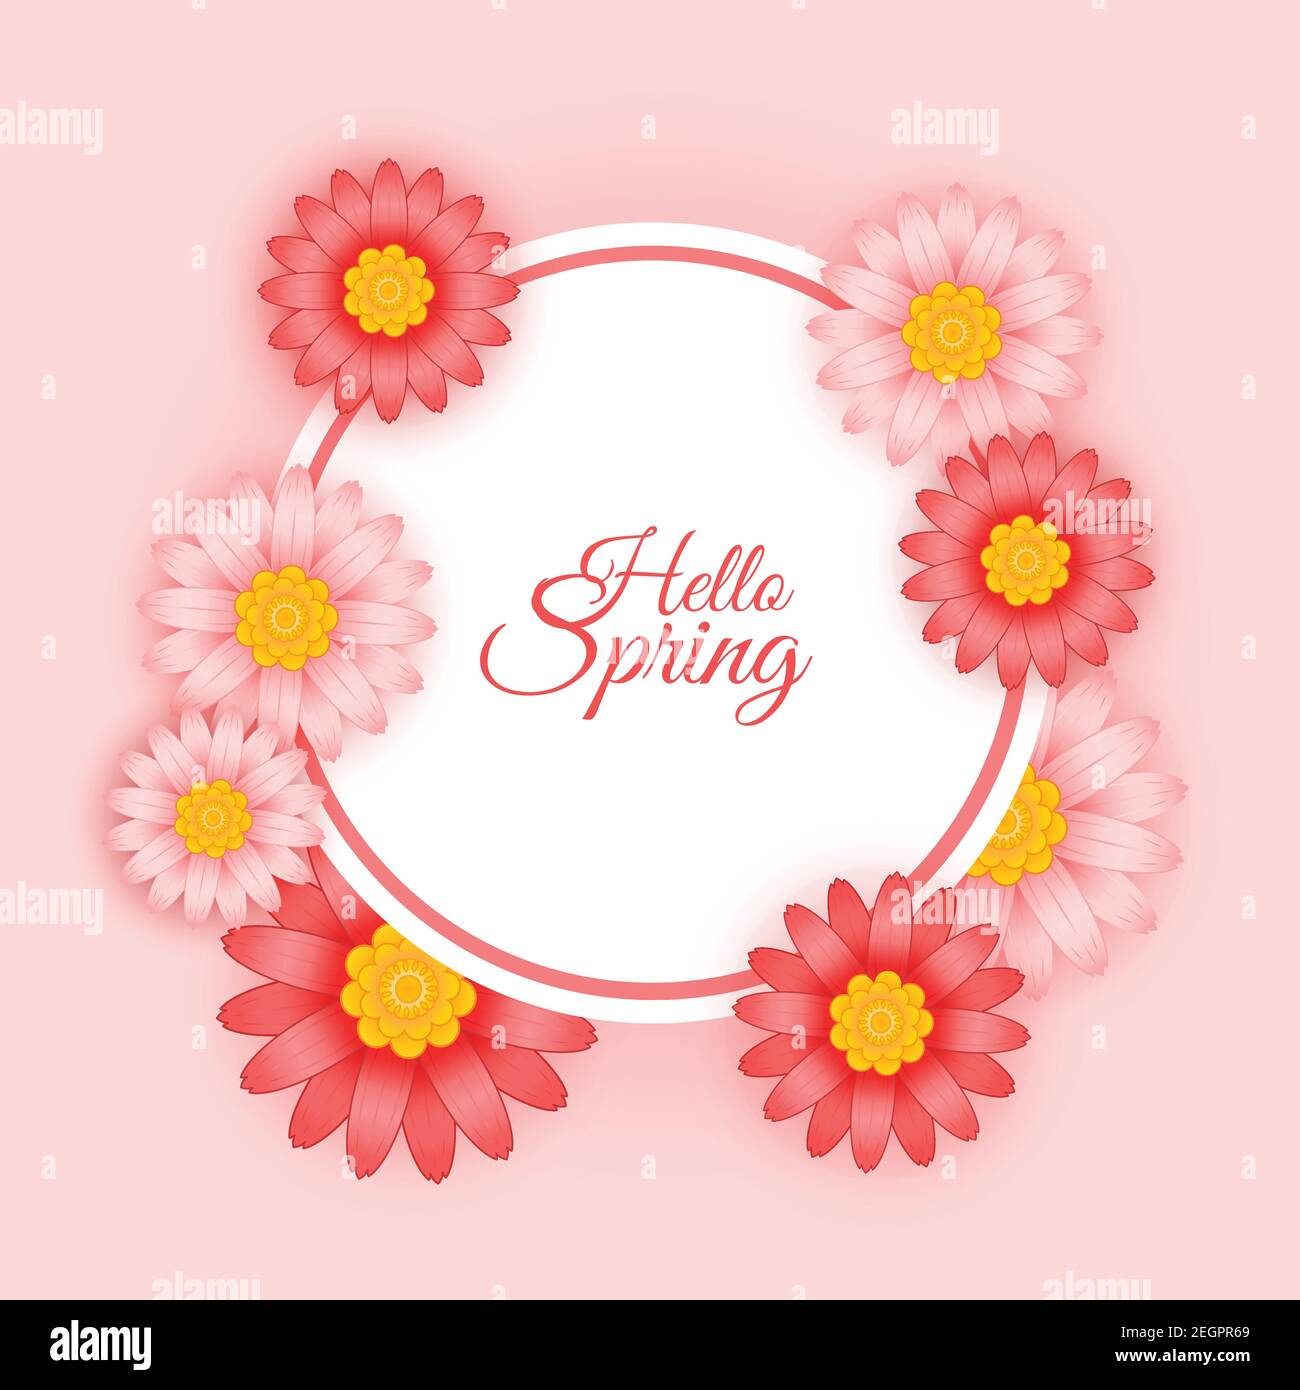 hello spring with beautiful flowers, pink theme illustration vector, additional image can be edit layer by layer EPS 10 Stock Vector